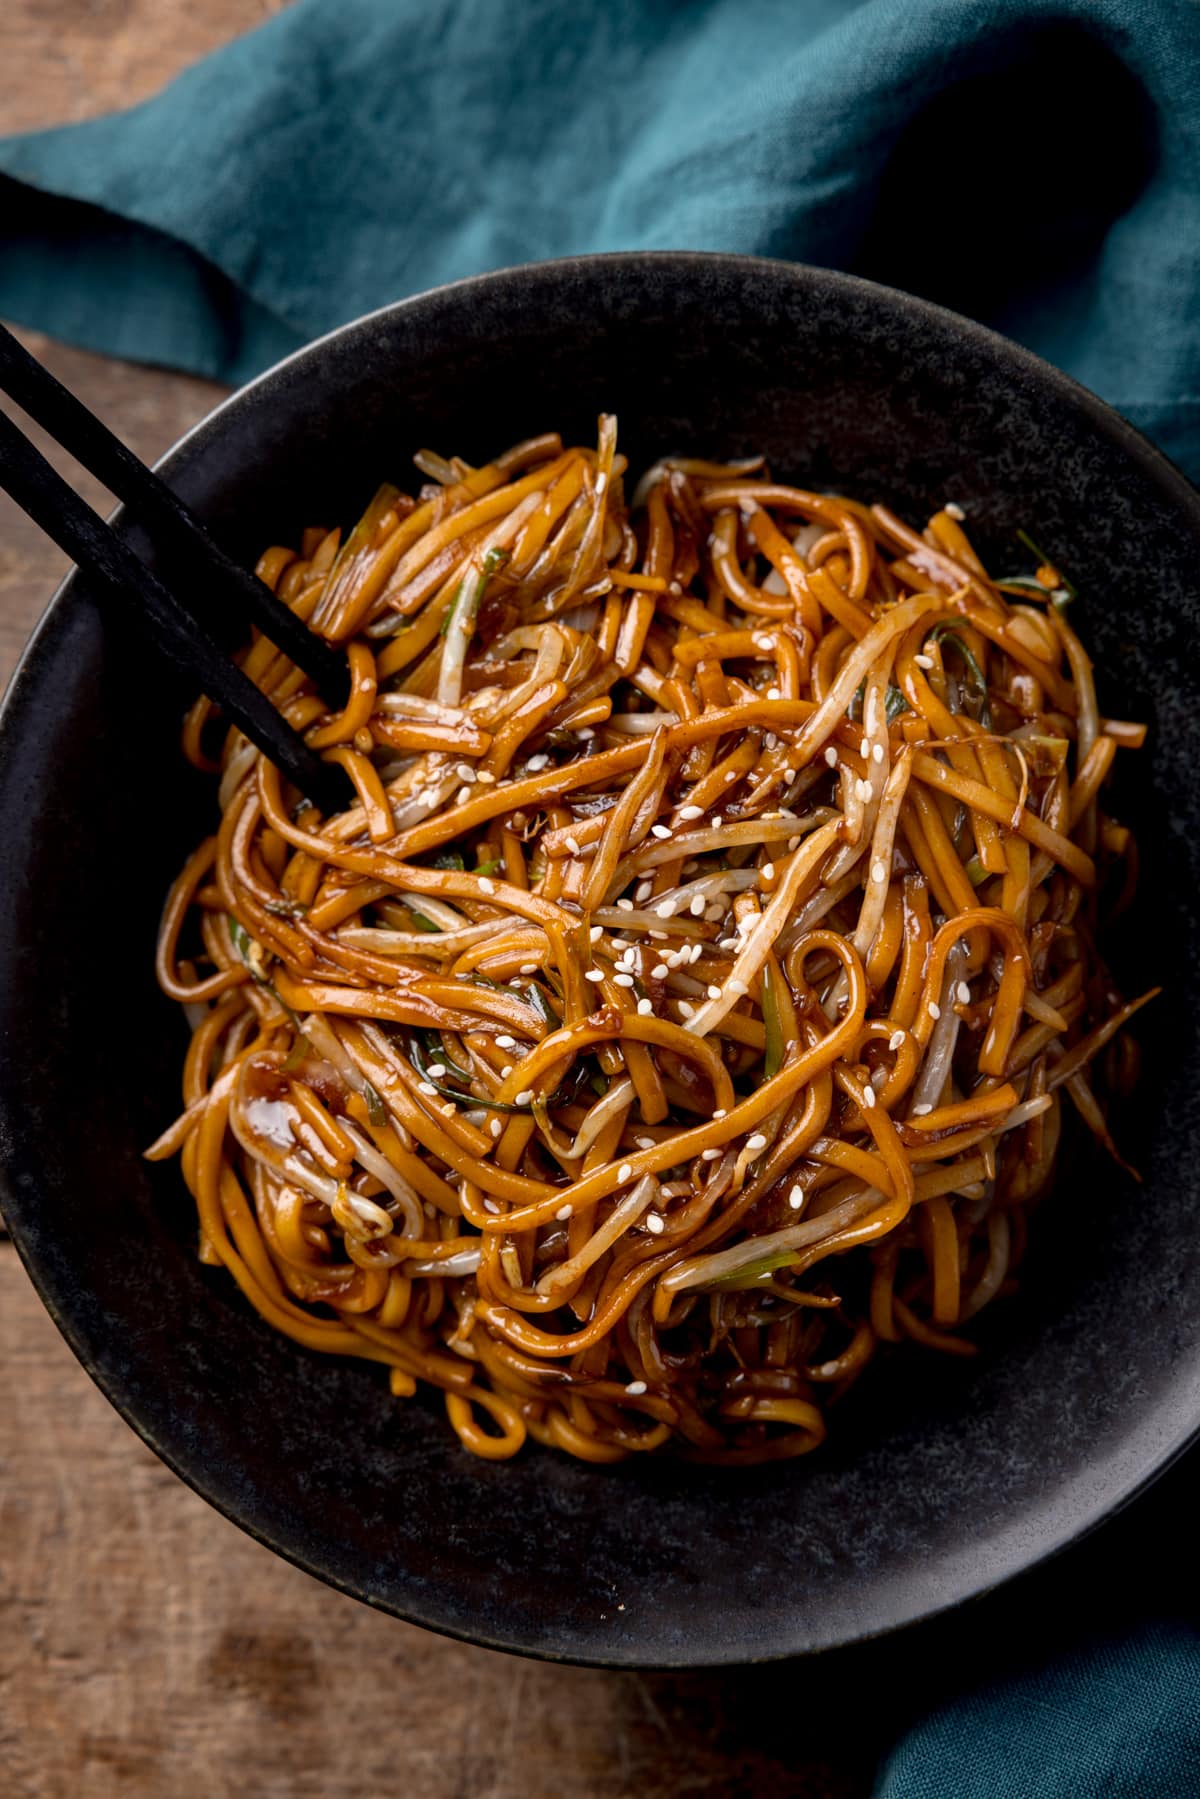 Tall overhead image of stir-fried noodles with beansprouts in a black bowl, with sesame seeds sprinkled on top. The bowl is on a wooden table next to a teal napkin. There is a pair of black wooden chopsticks sticking out of the bowl.